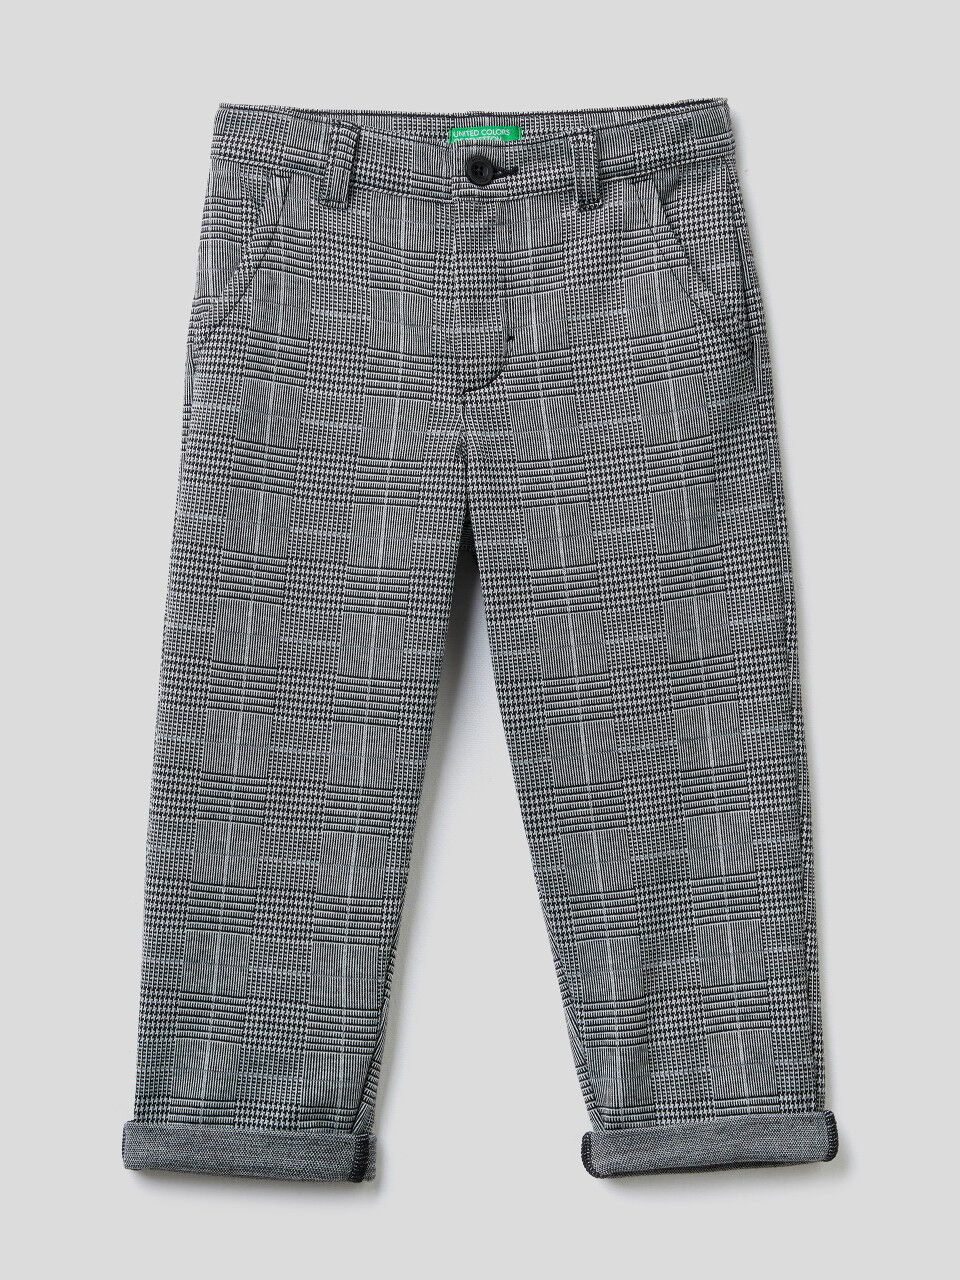 New Benetton 012 Benetton Boys Black and White Check Lined Trousers With Braces Size 8 